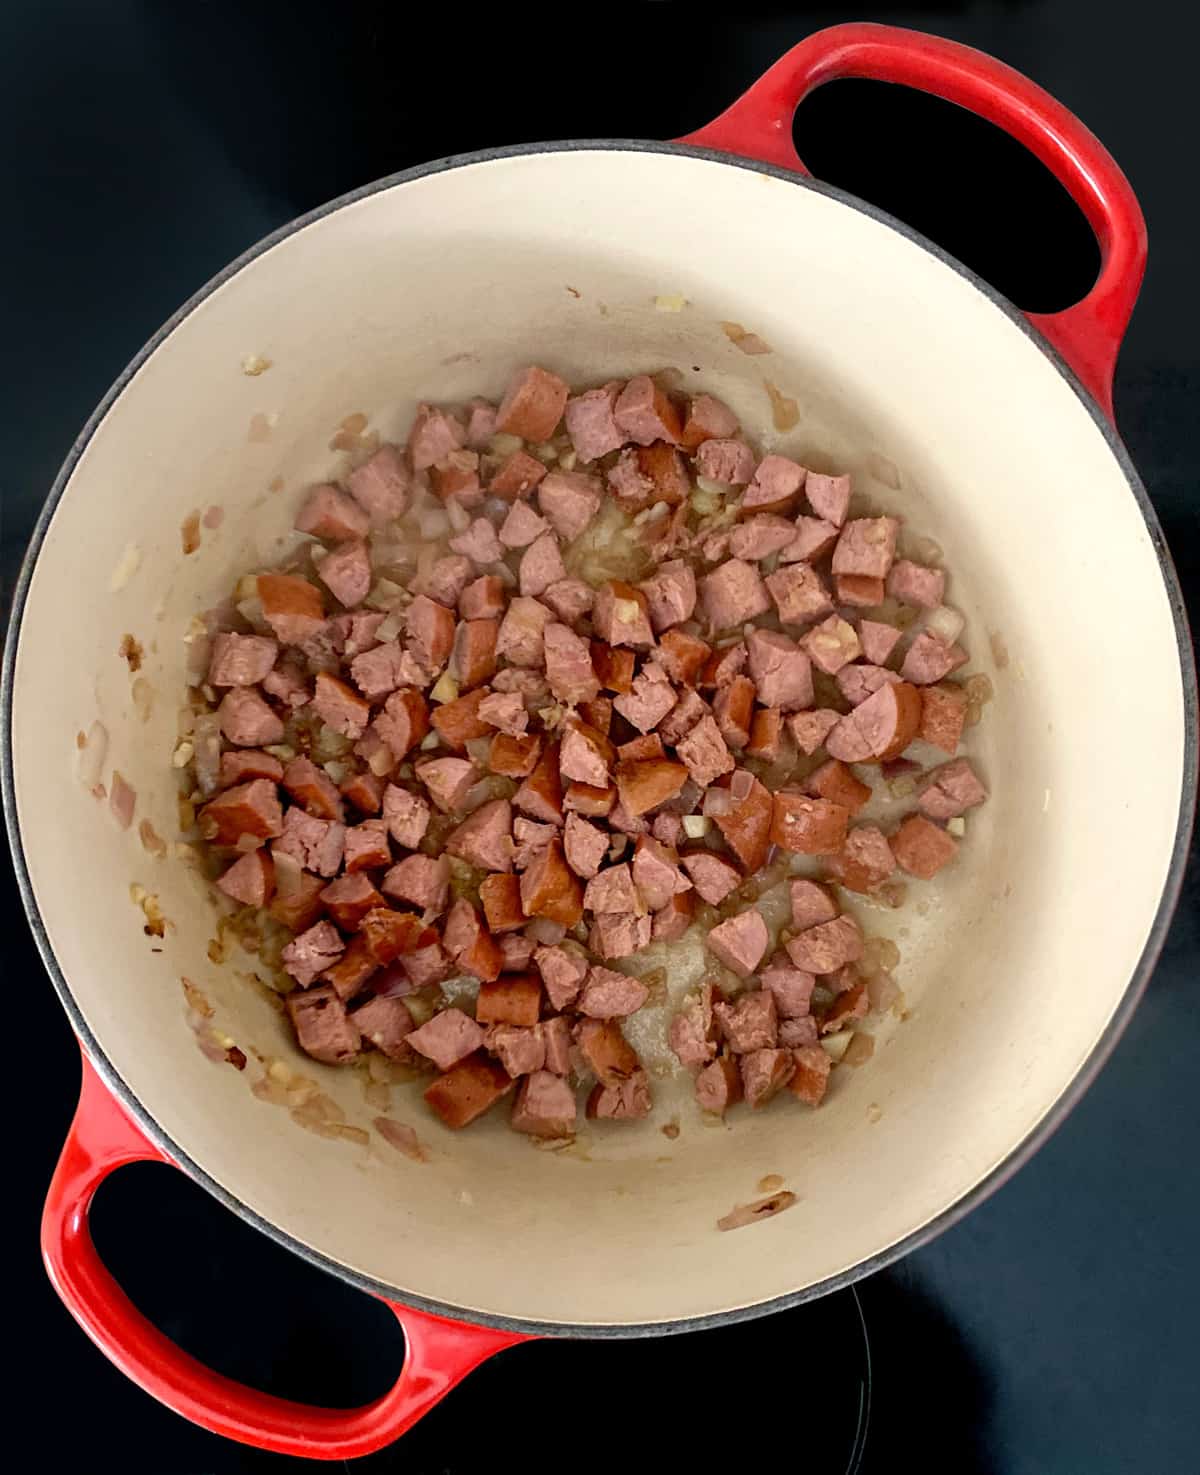 Cut up sausage and diced onion with olive oil in a stockpot.